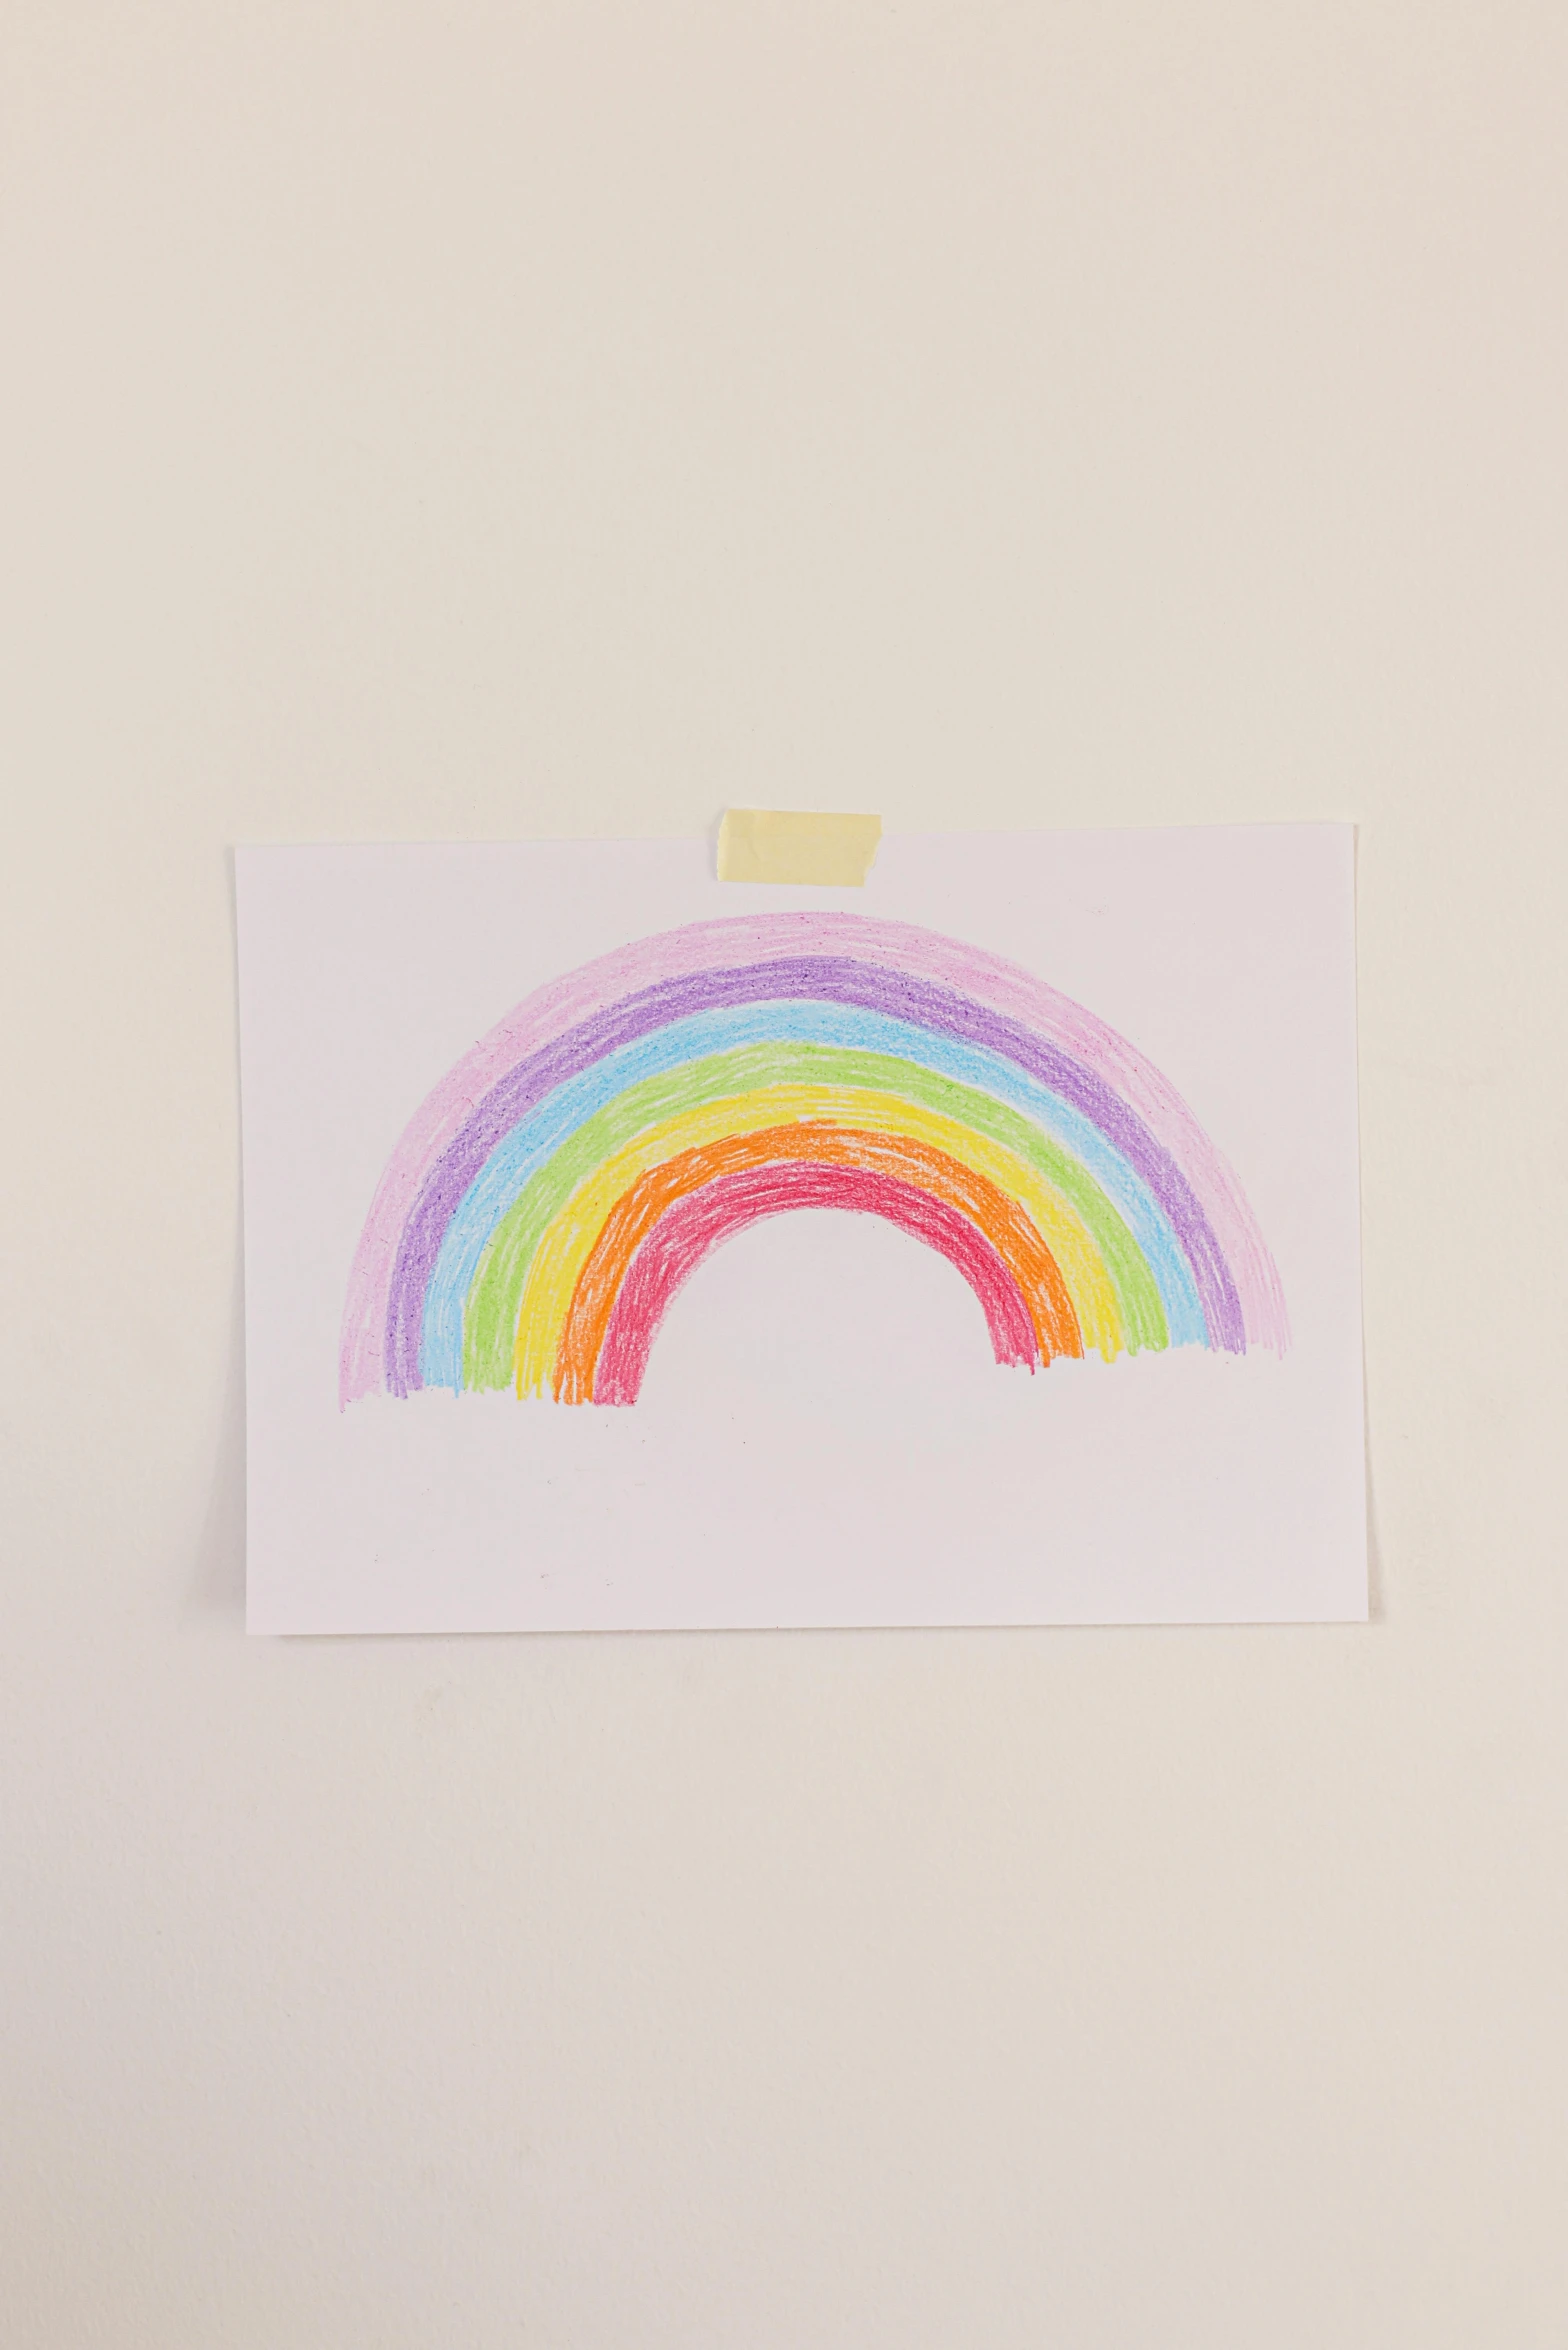 a piece of paper with a rainbow painted on it, by Nicolette Macnamara, sticker art, full protrait, product introduction photo, on white paper